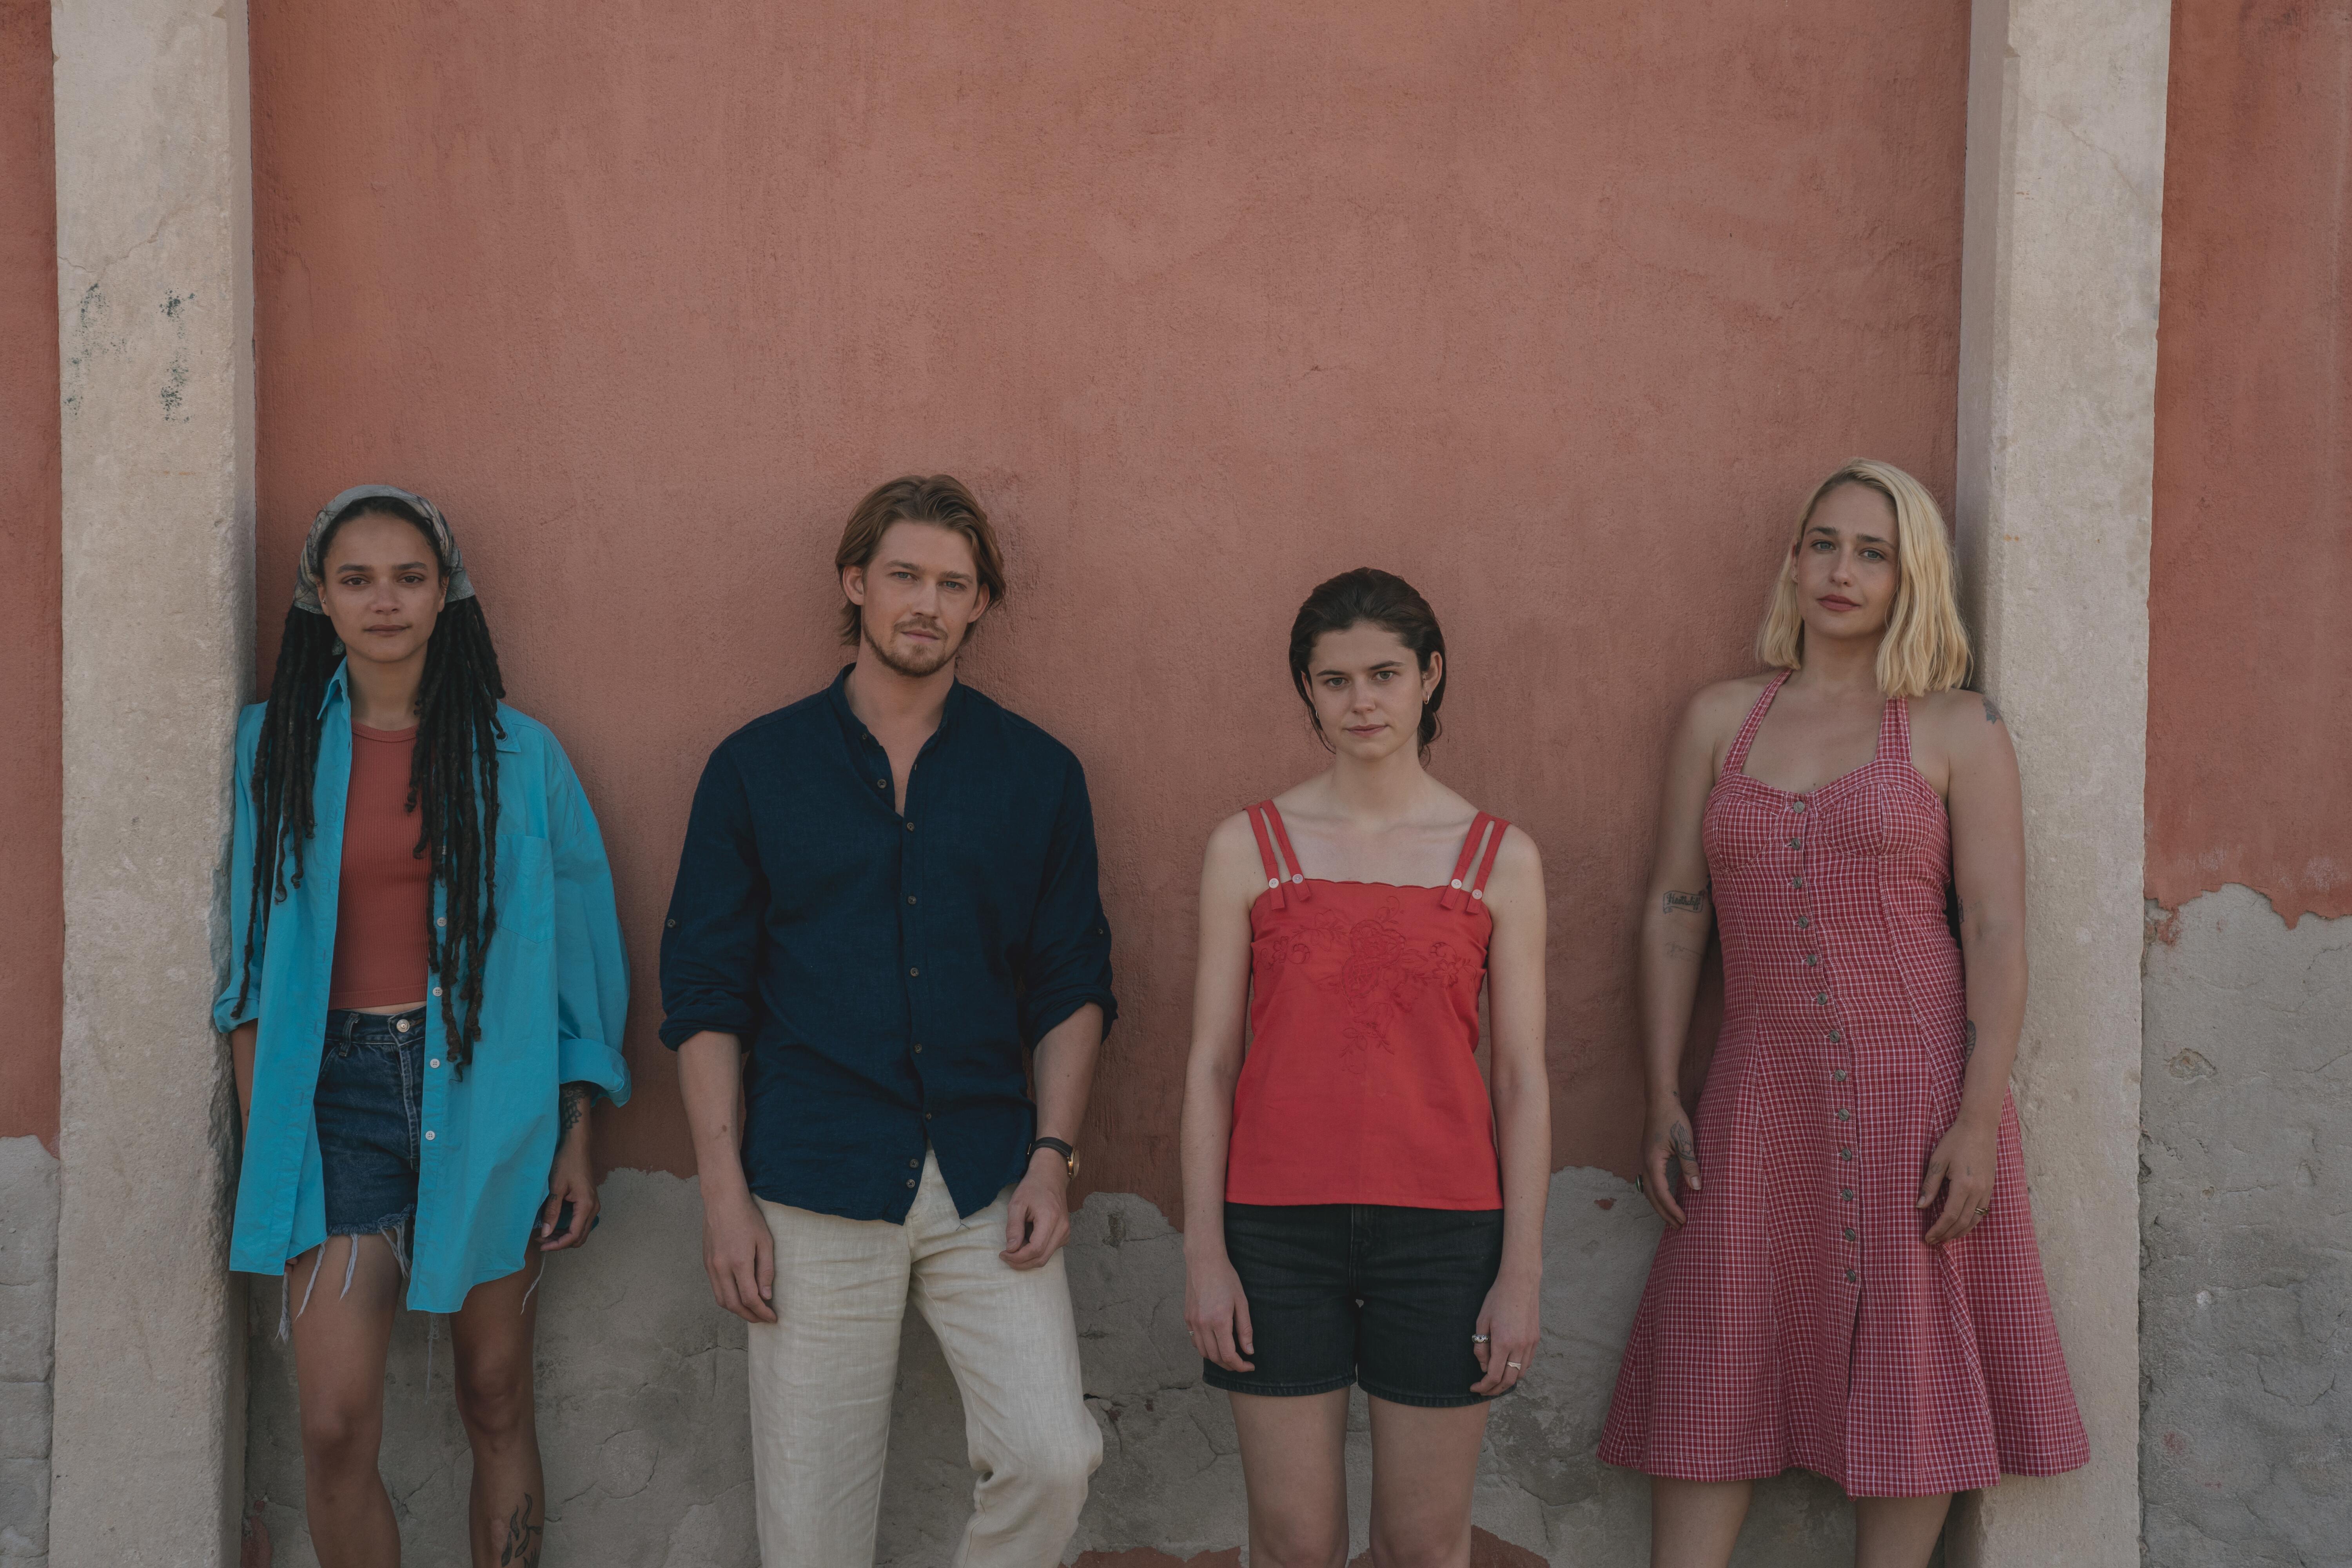 Sasha Lane as Bobbi, Joe Alwyn as Nick, Alison Oliver as Frances and Jemima Kirke as Melissa in promotional photos for 'Conversation with Friends'